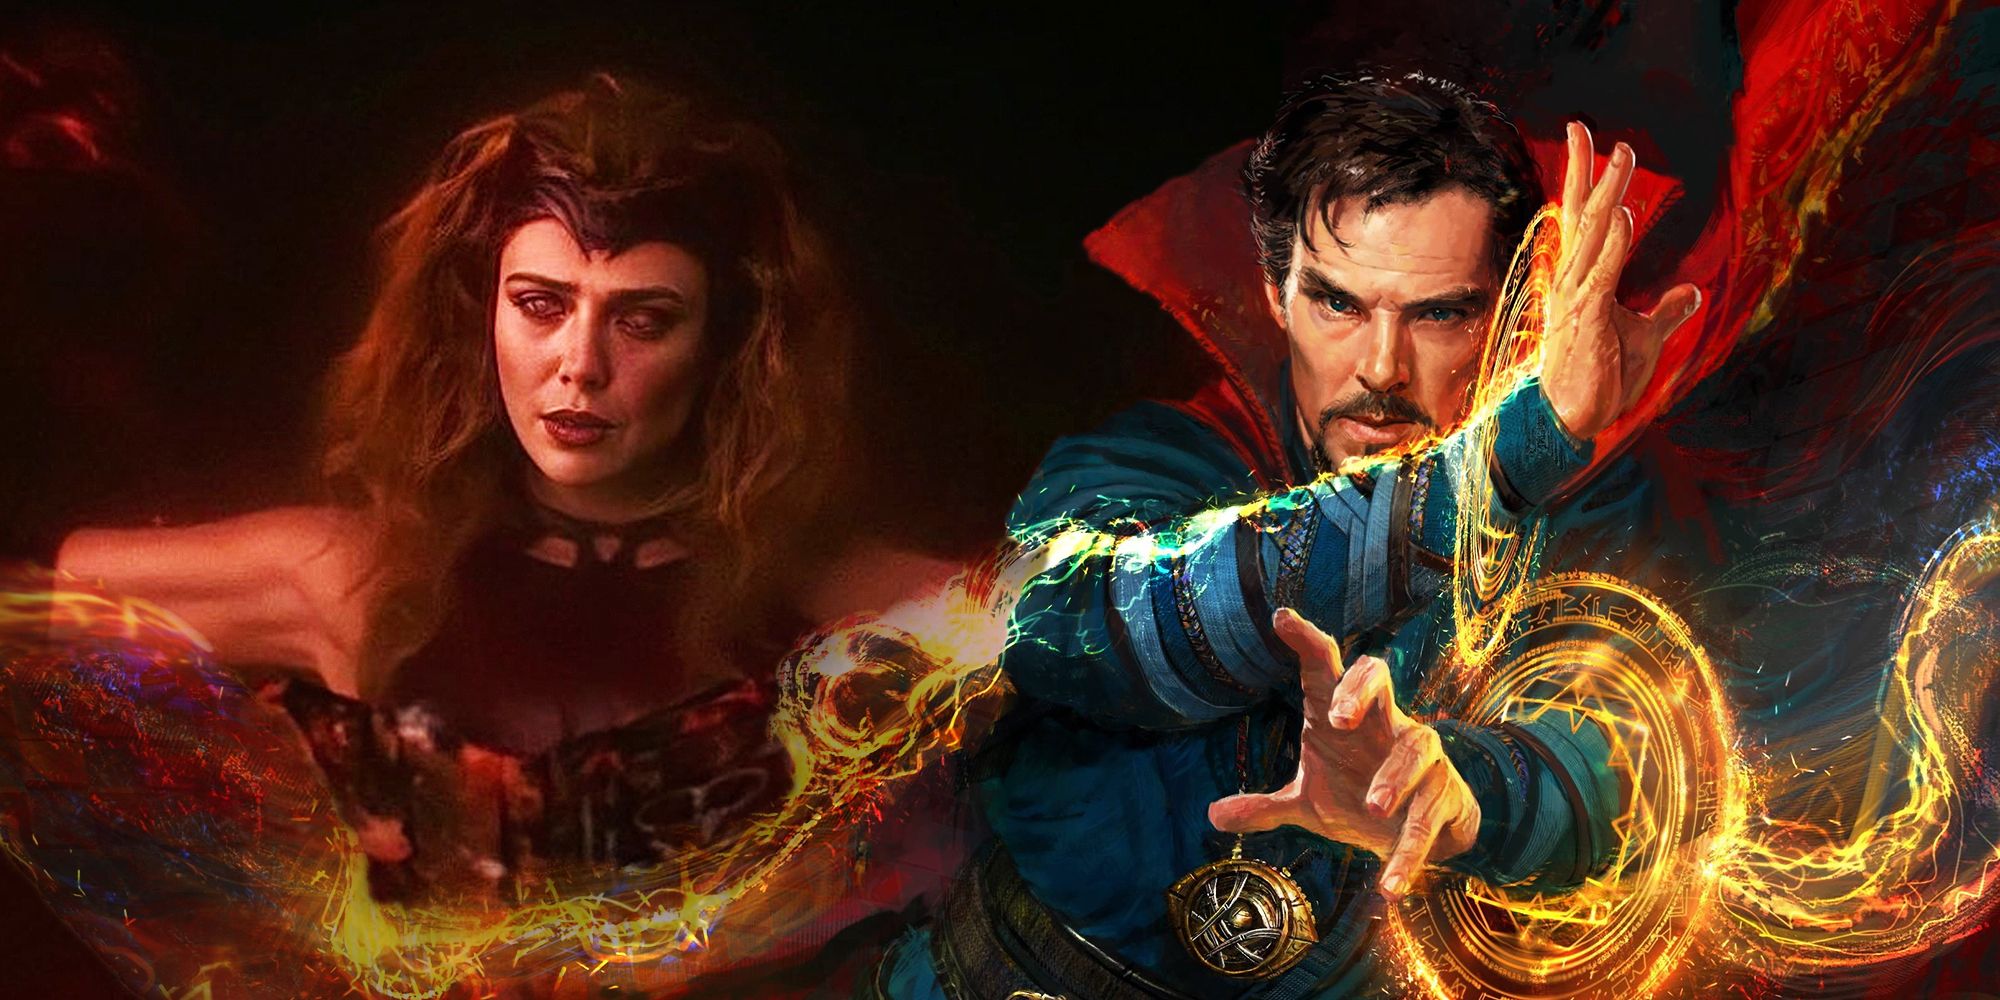 Doctor Strange and Scarlet Witch in the MCU